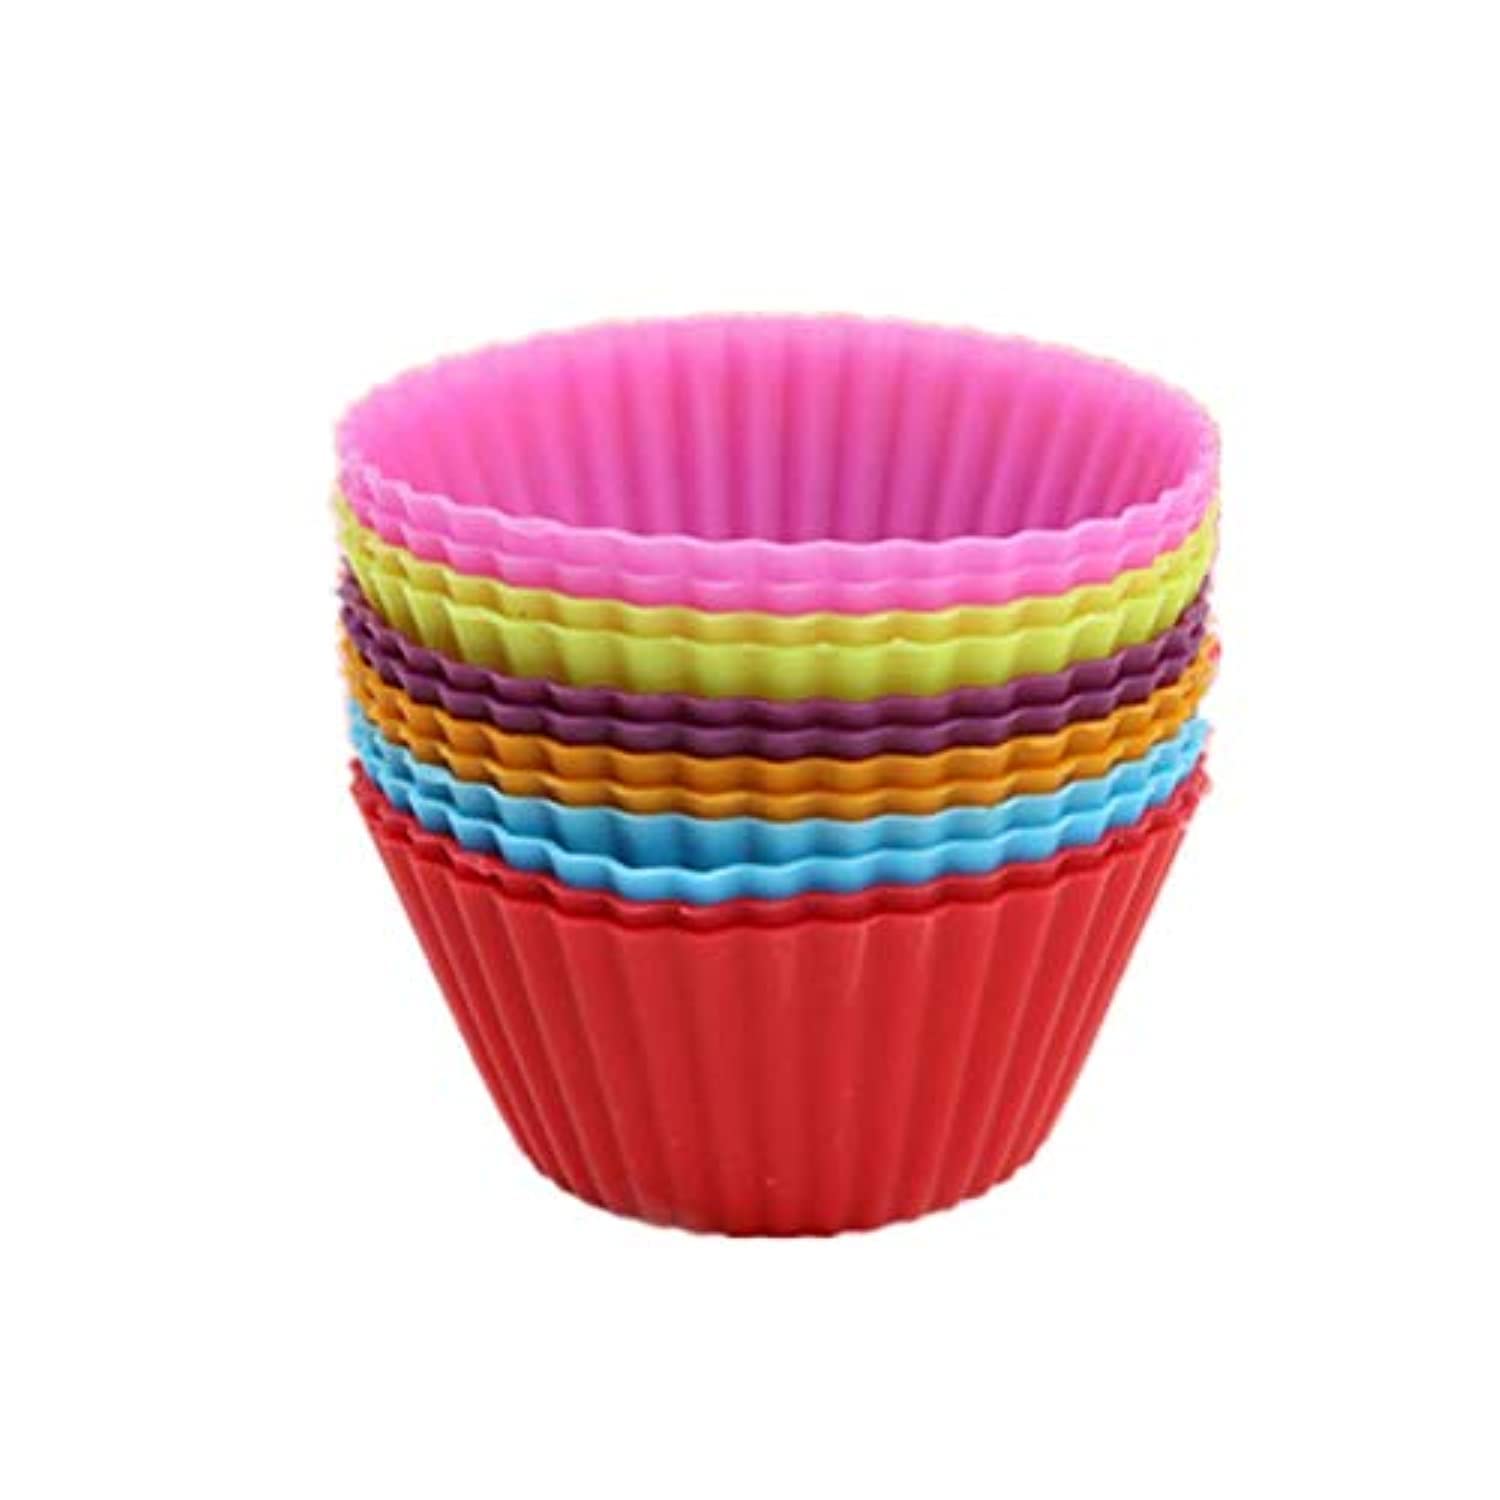 12 P cs Silicone Cupcake Molds Muffin Molds Cupcake Cases (12 Round Cups) Non-Stick, Heat Resistant Up to 480 F Baking Molds, Food Grade